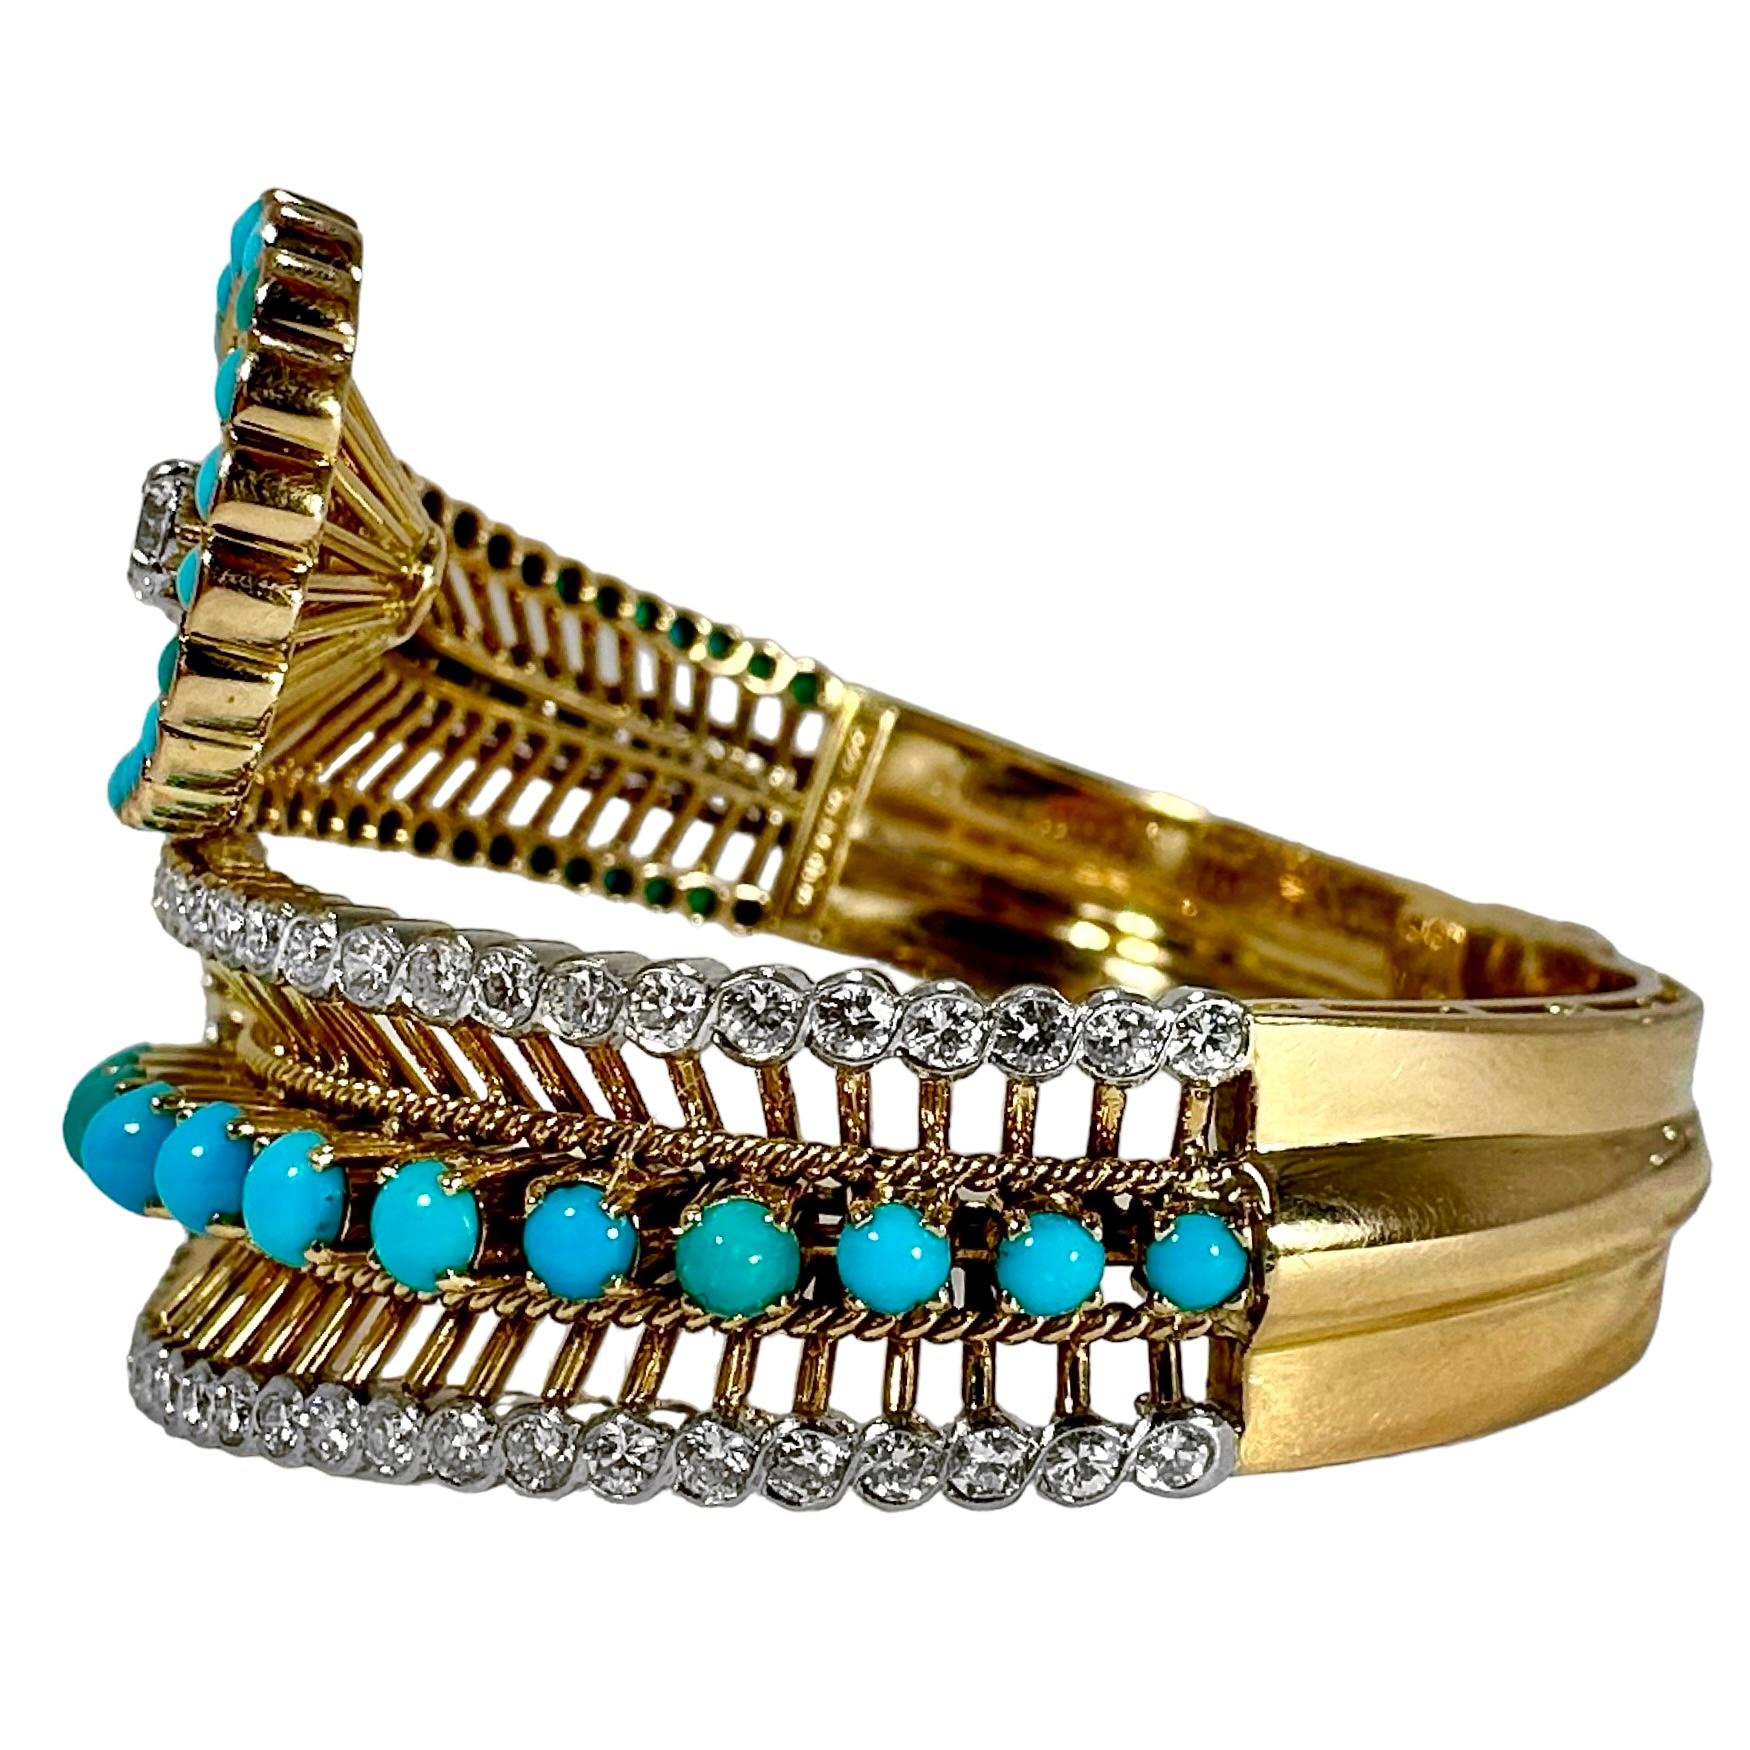 Brilliant Cut Elegant Wide Bypass Cuff in Gold, Turquoise & Diamonds by Greek Maker VOURAKIS 